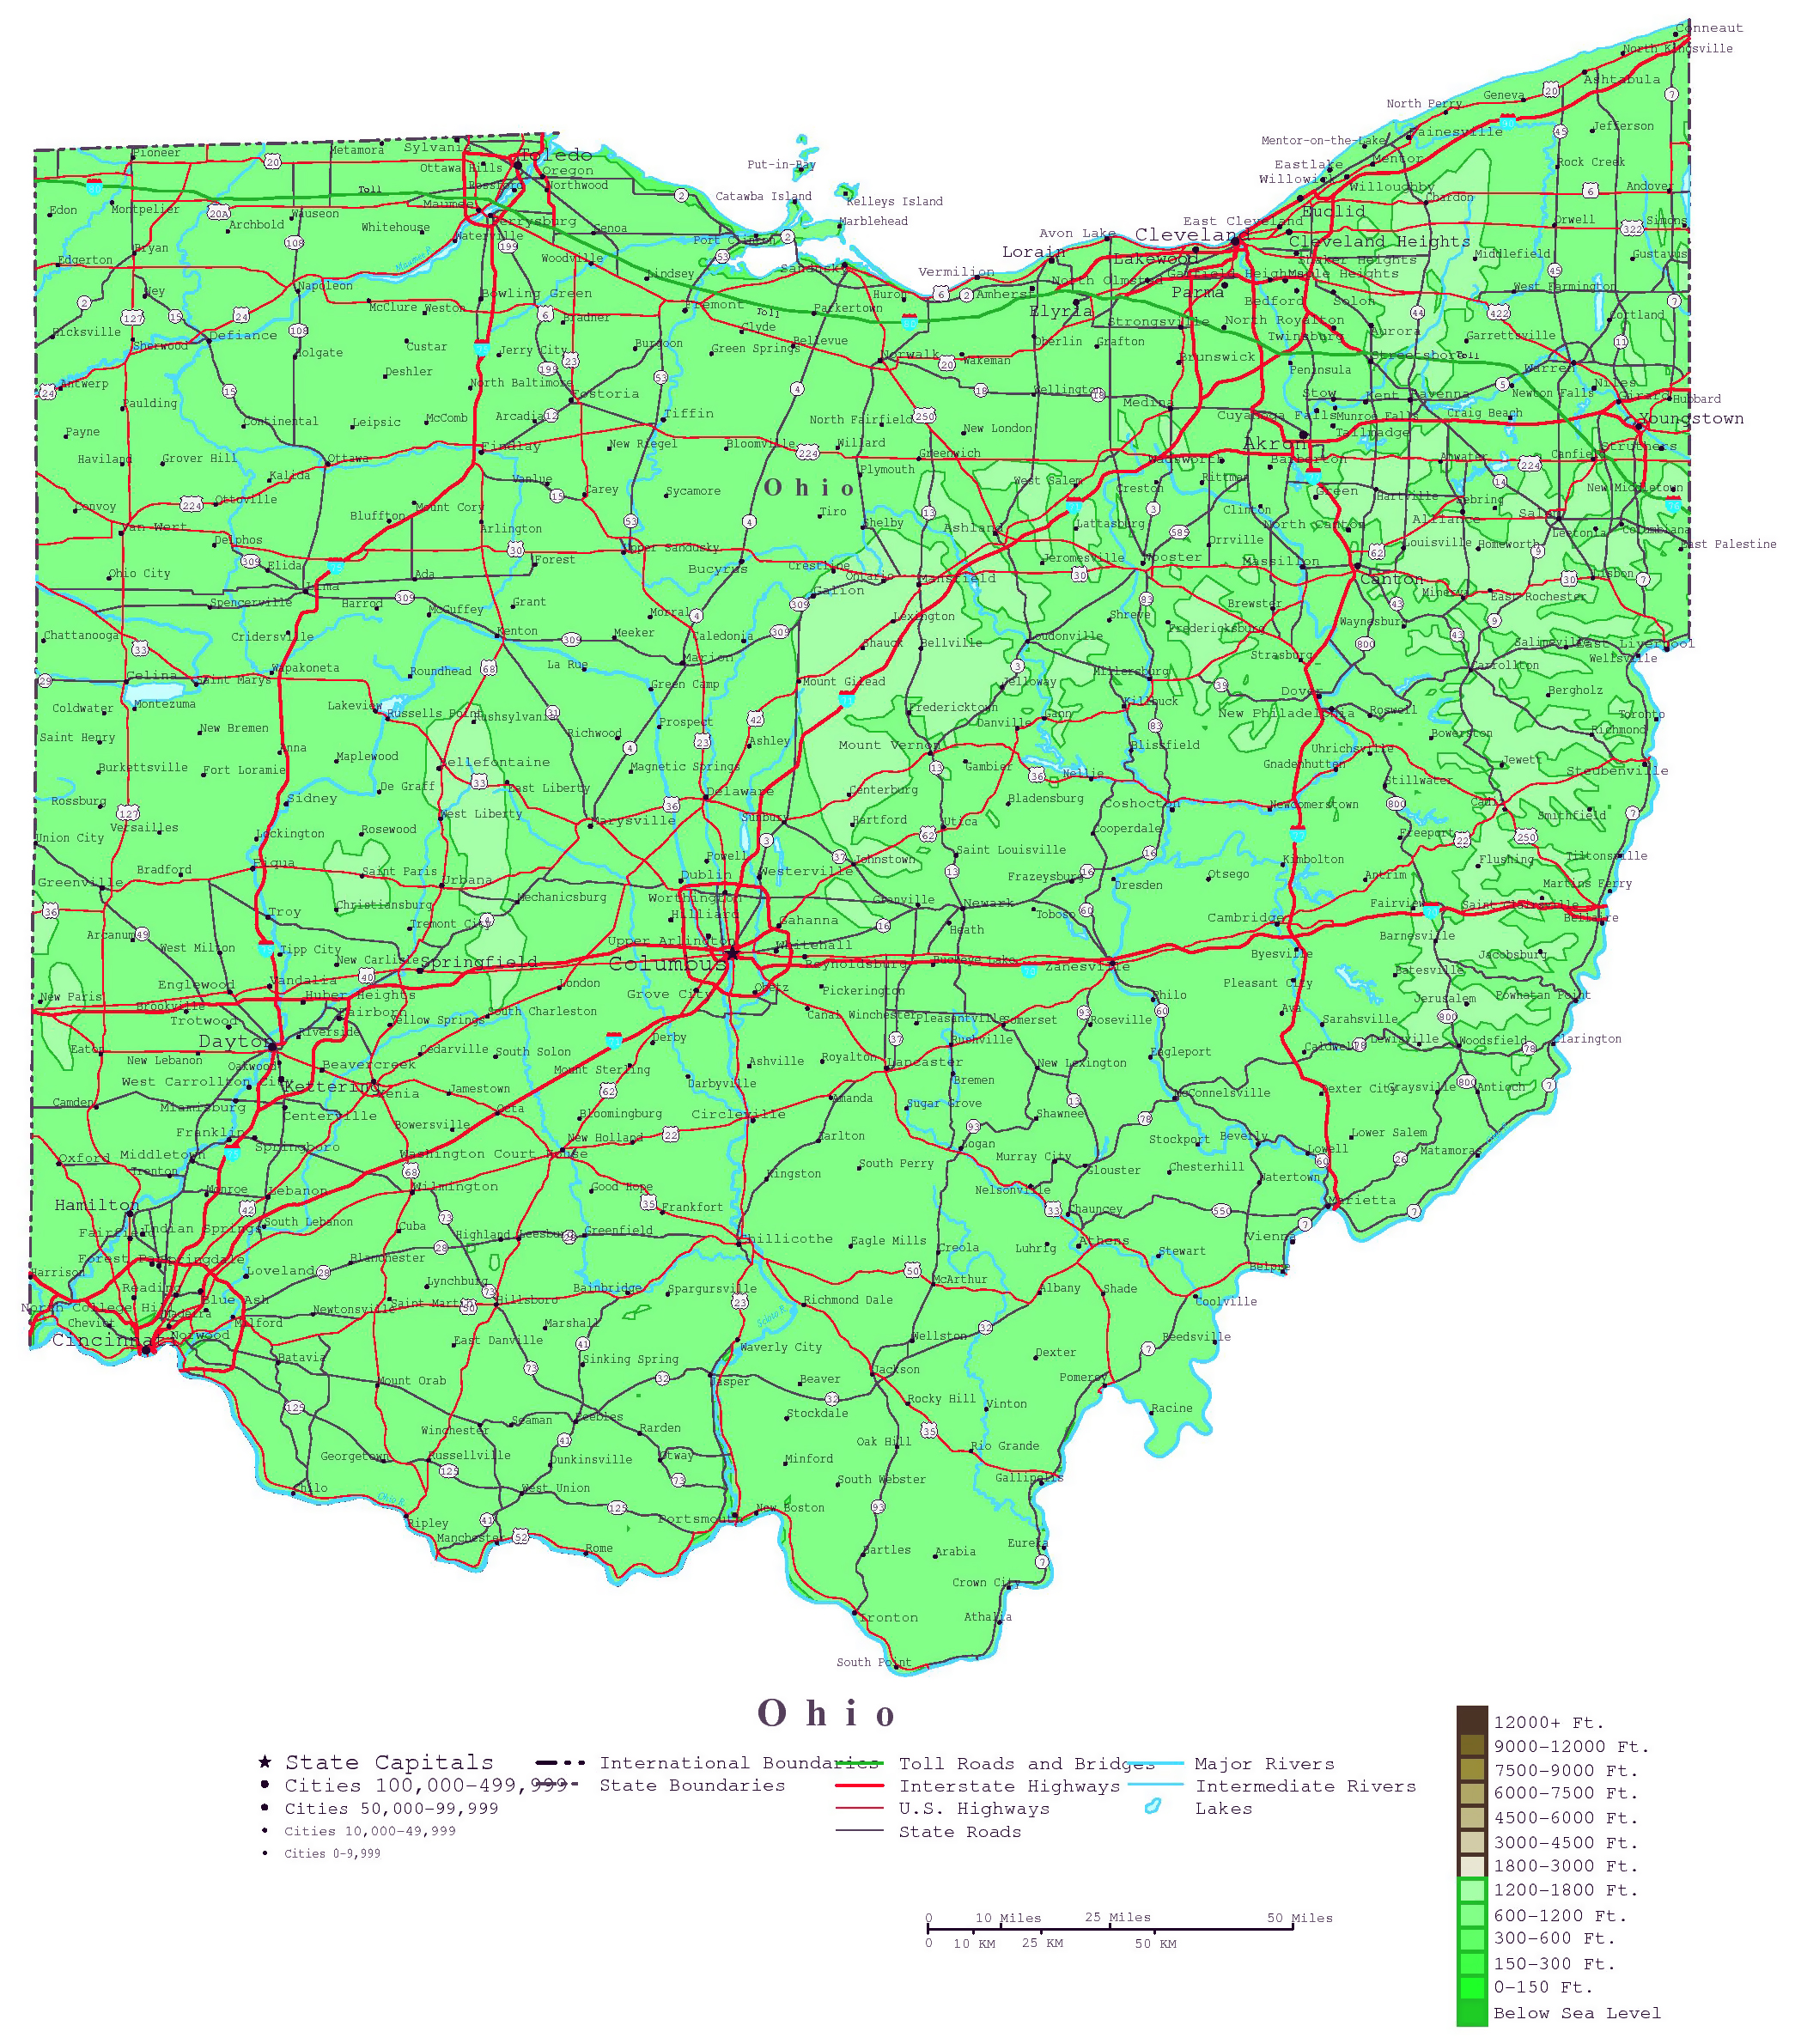 Large Detailed Elevation Map Of Ohio State With Roads And Cities